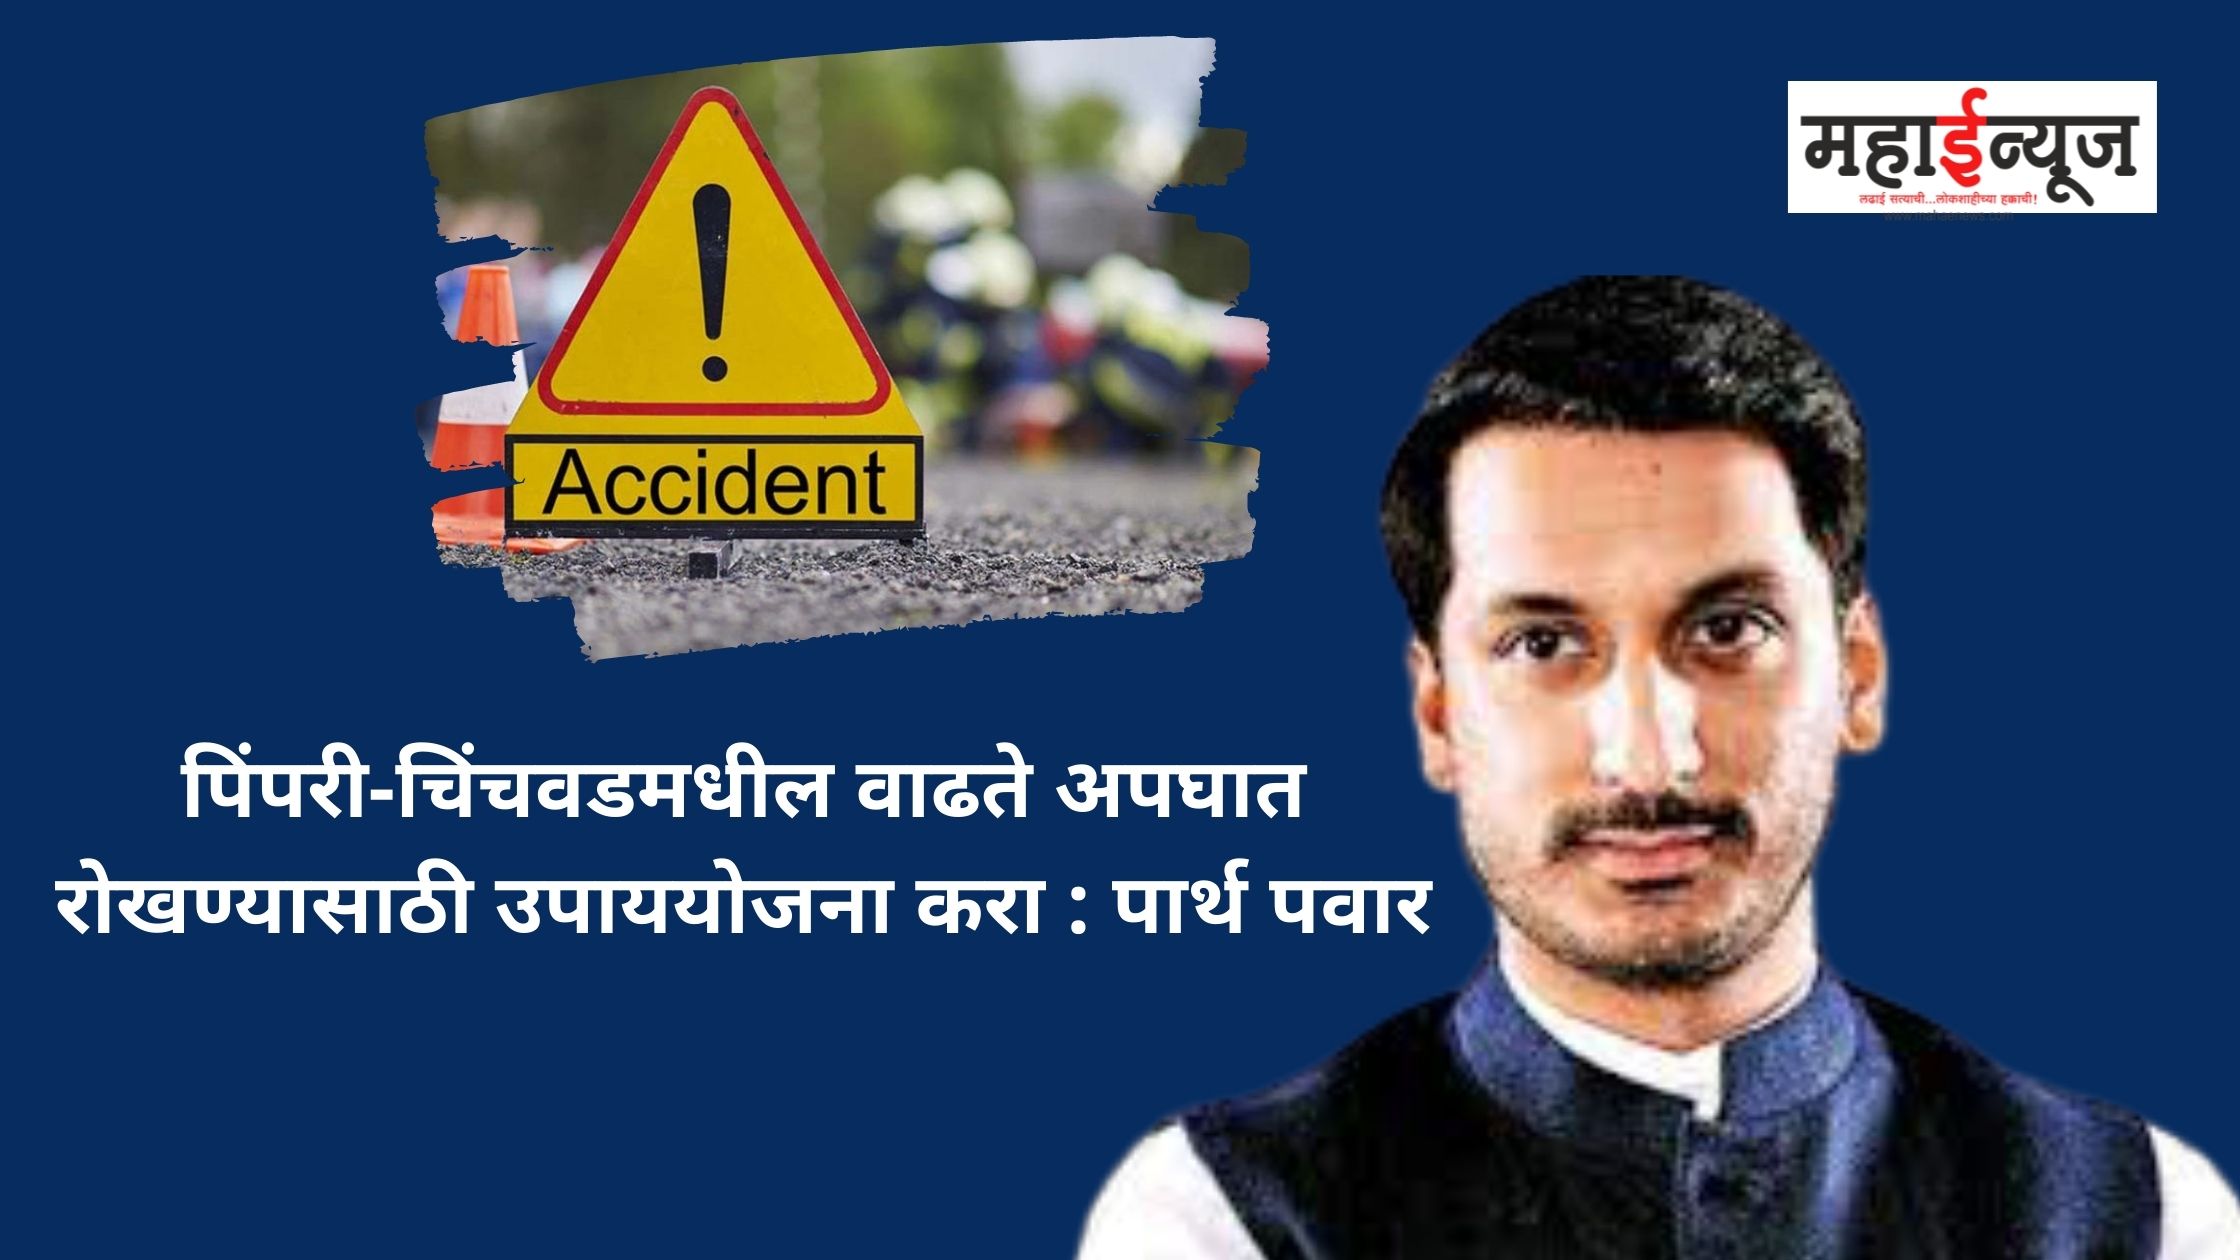 Take measures to prevent increasing accidents in Pimpri-Chinchwad: Partha Pawar